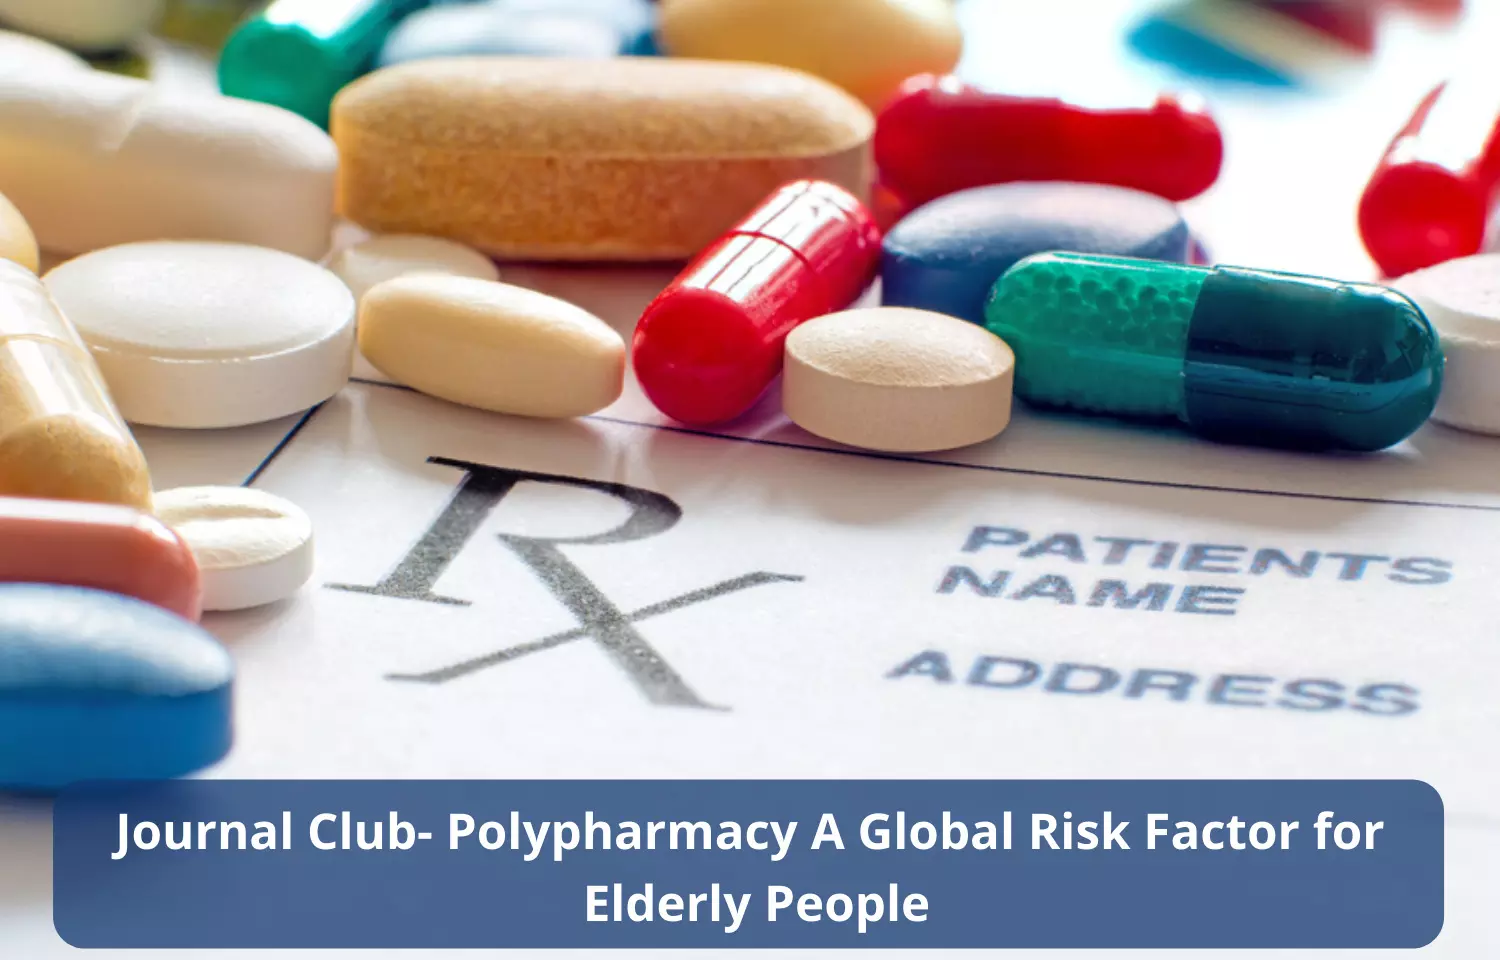 Journal Club- Polypharmacy A Global Risk Factor for Elderly People